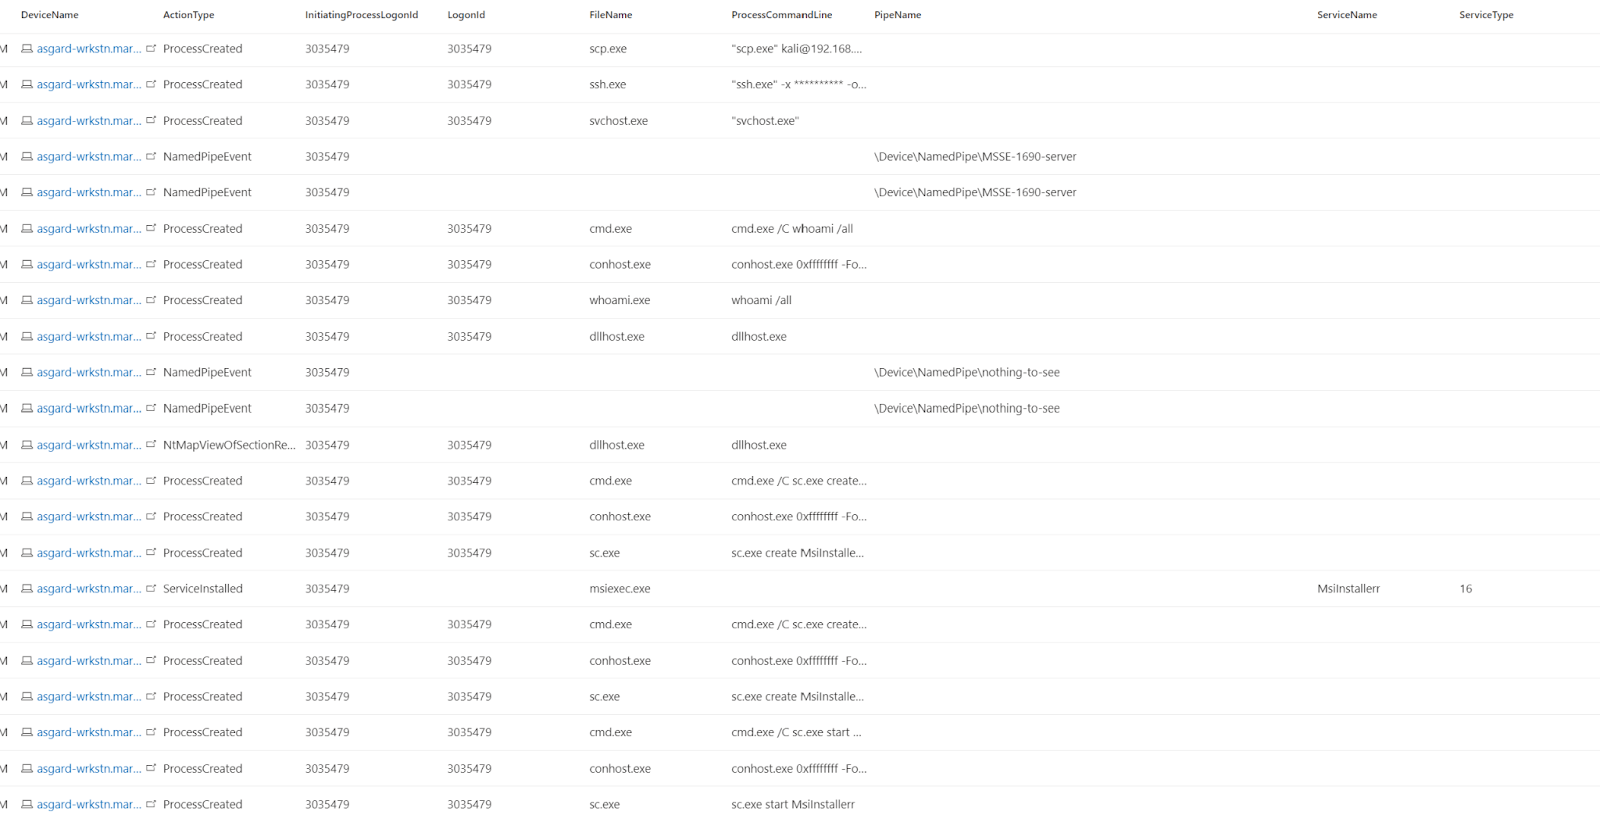 List of suspicious activity from unauthorized user account